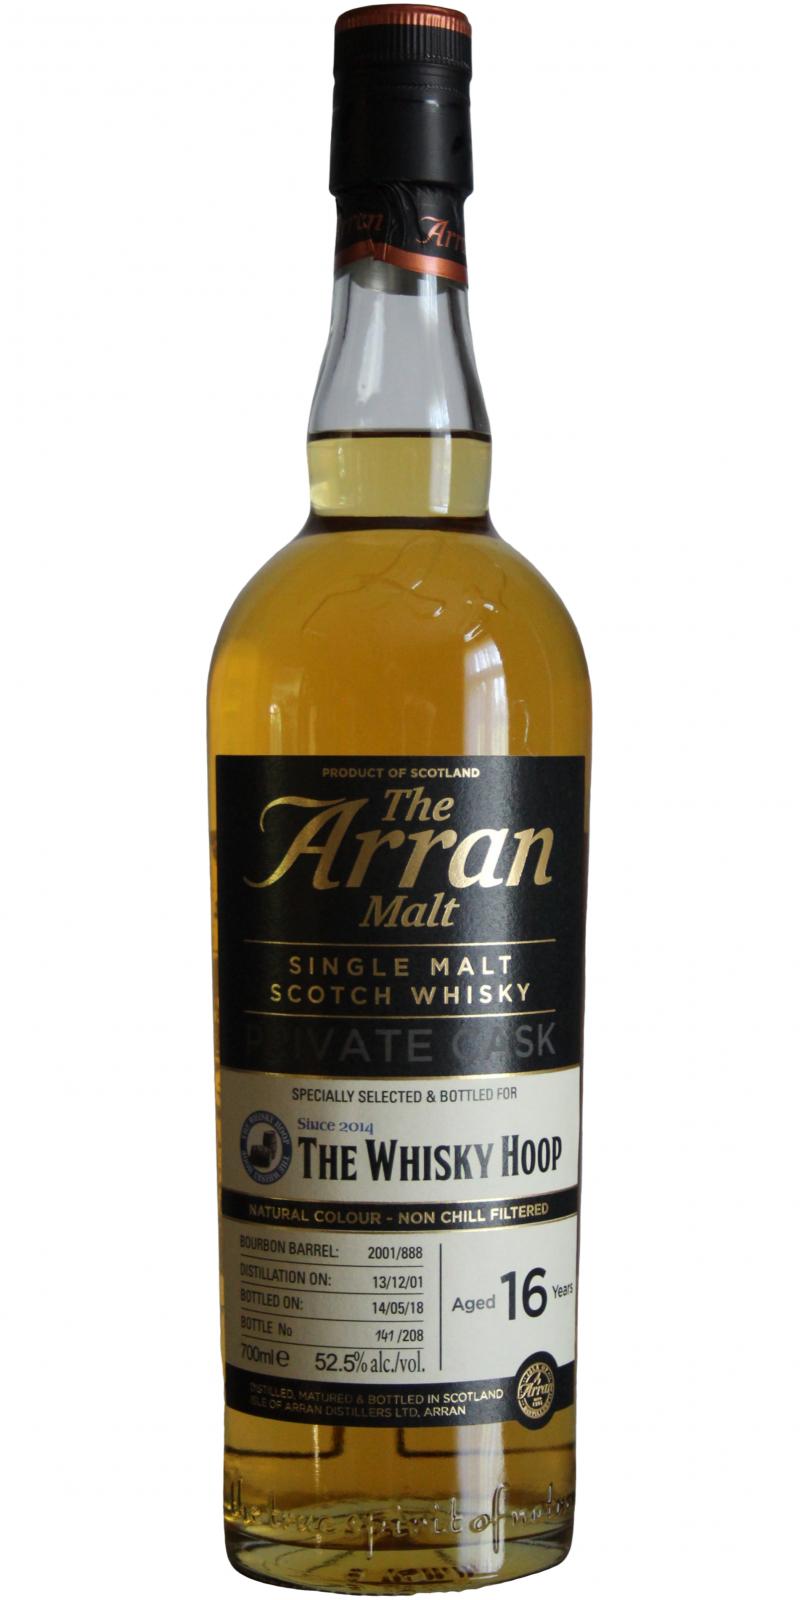 Arran 2001 Private Cask 2001/888 The Whisky Hoop 52.5% 700ml